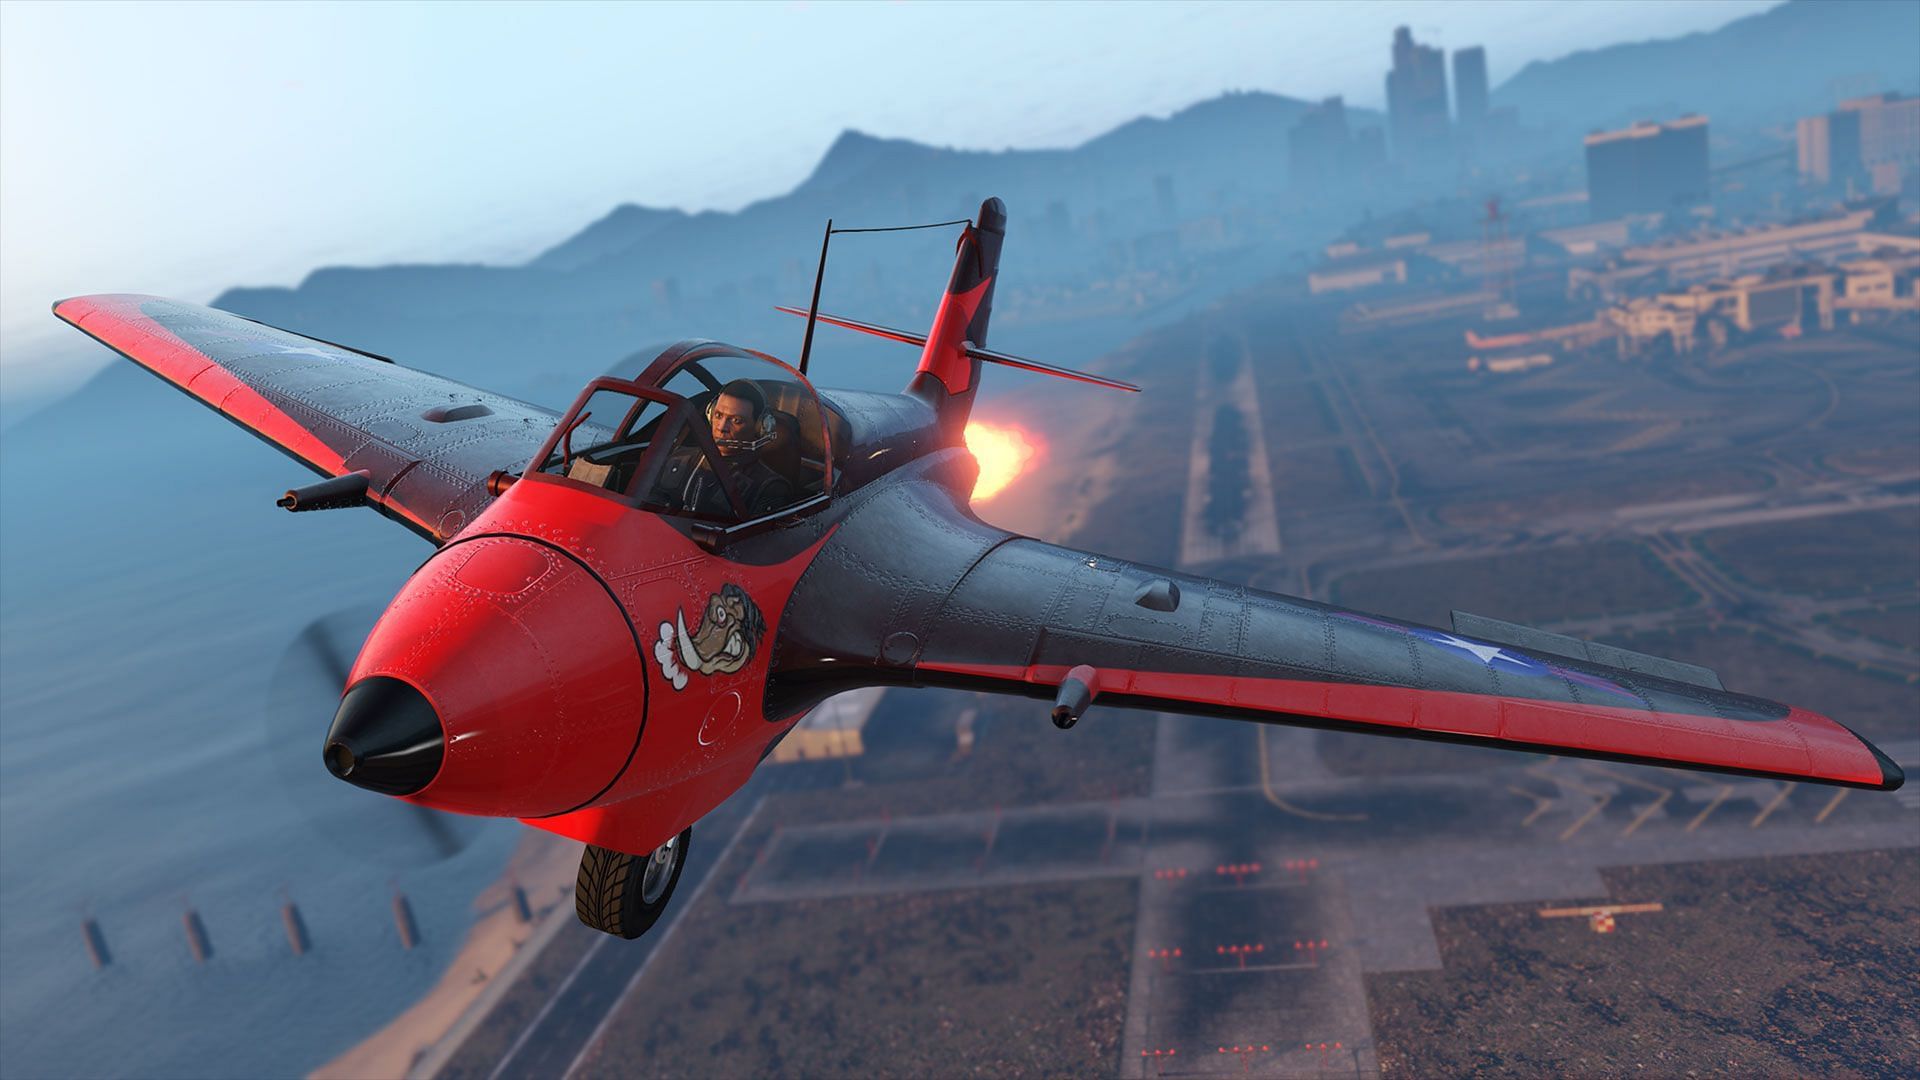 The LF-22 Starling is an excellent weaponized vehicle in GTA Online